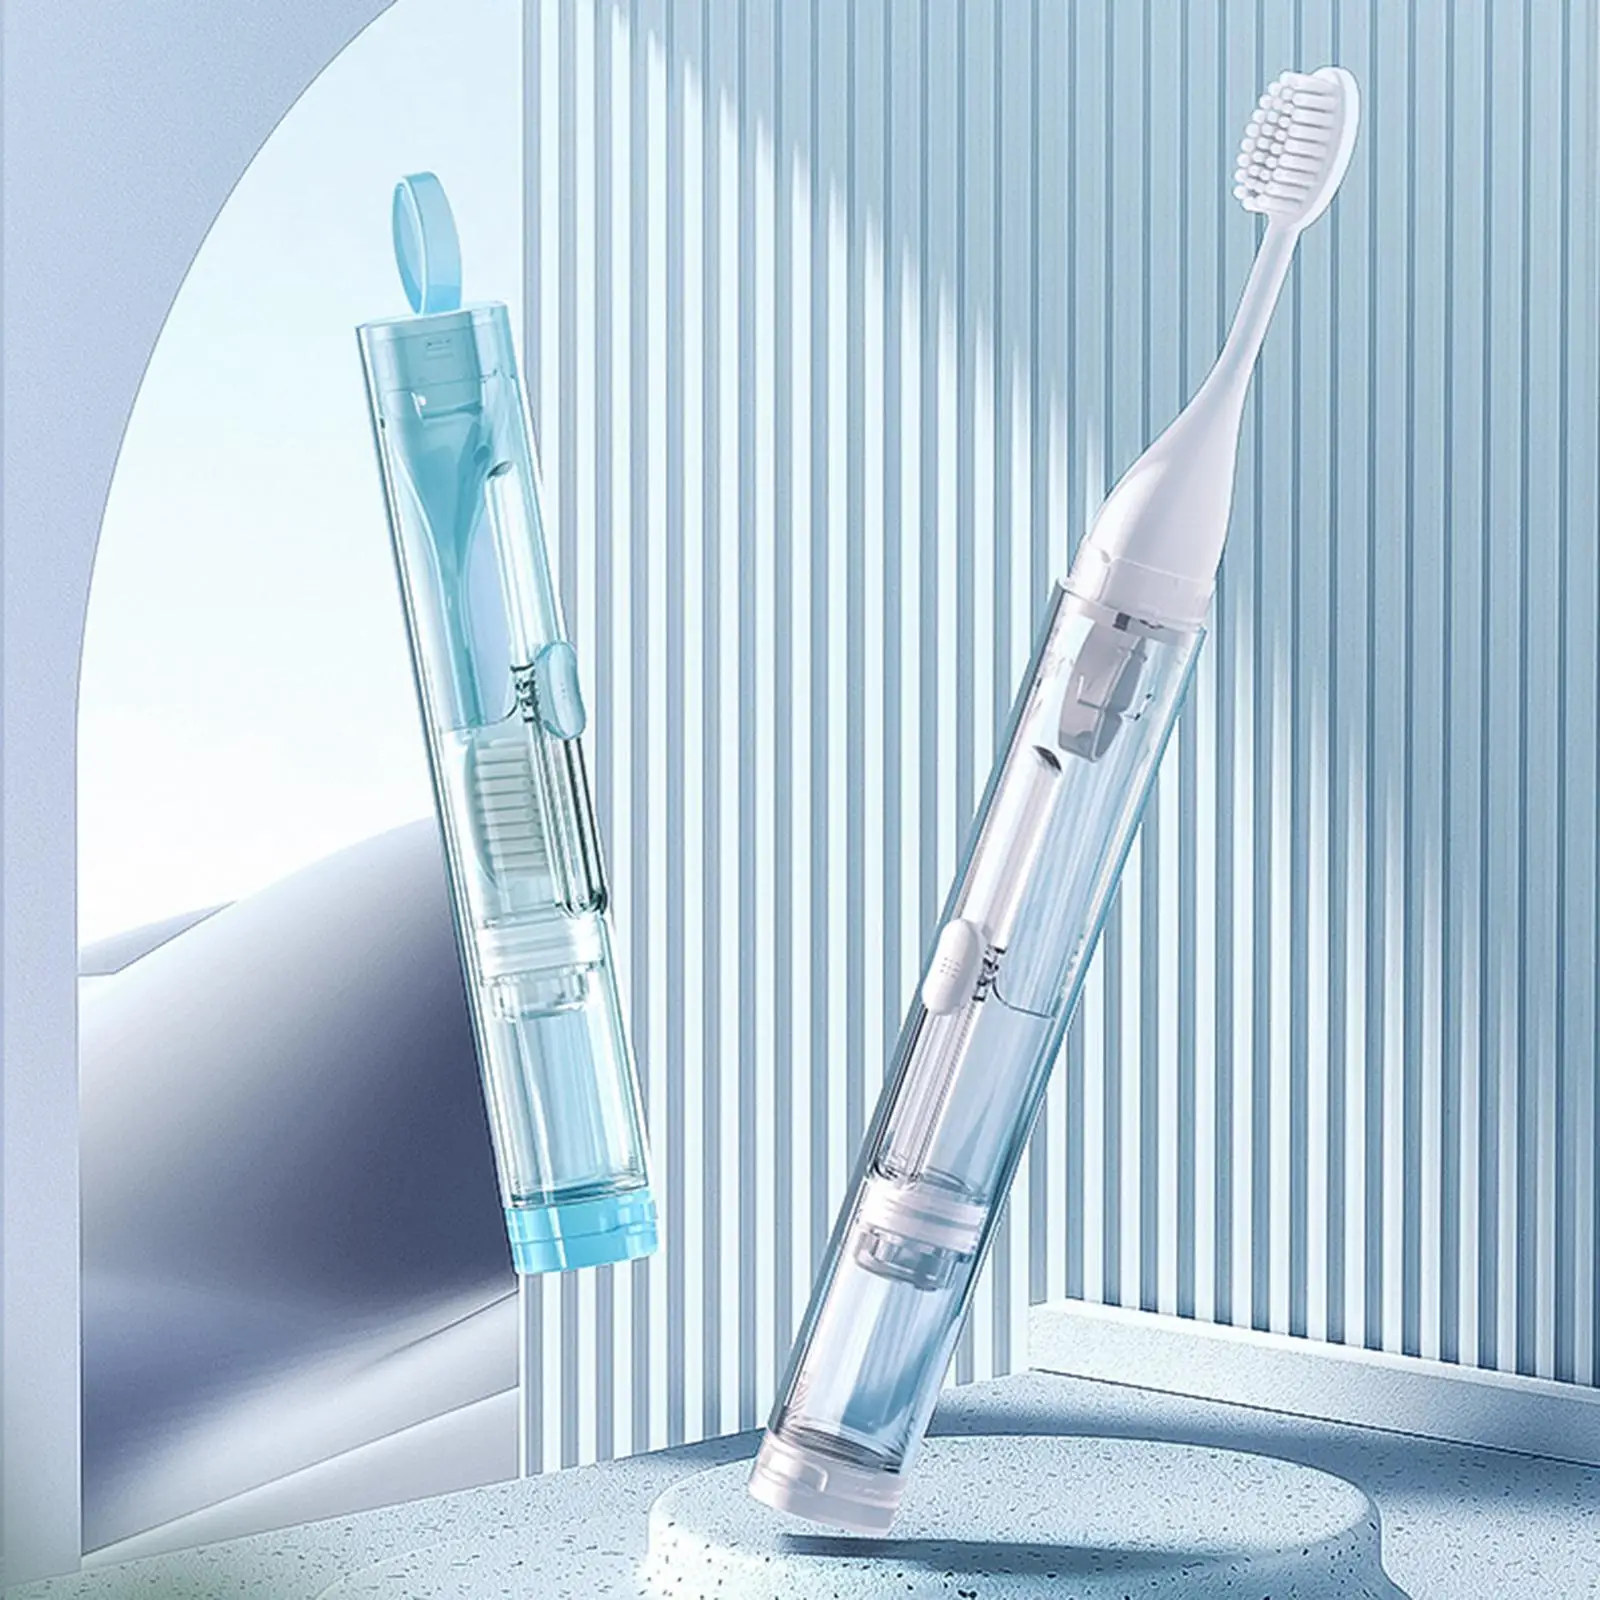 Portable Travel Toothbrush Set Oral Hygiene Soft Bristle Folding Toothbrush for Holidays Camping Backpacking Brush Box Holder